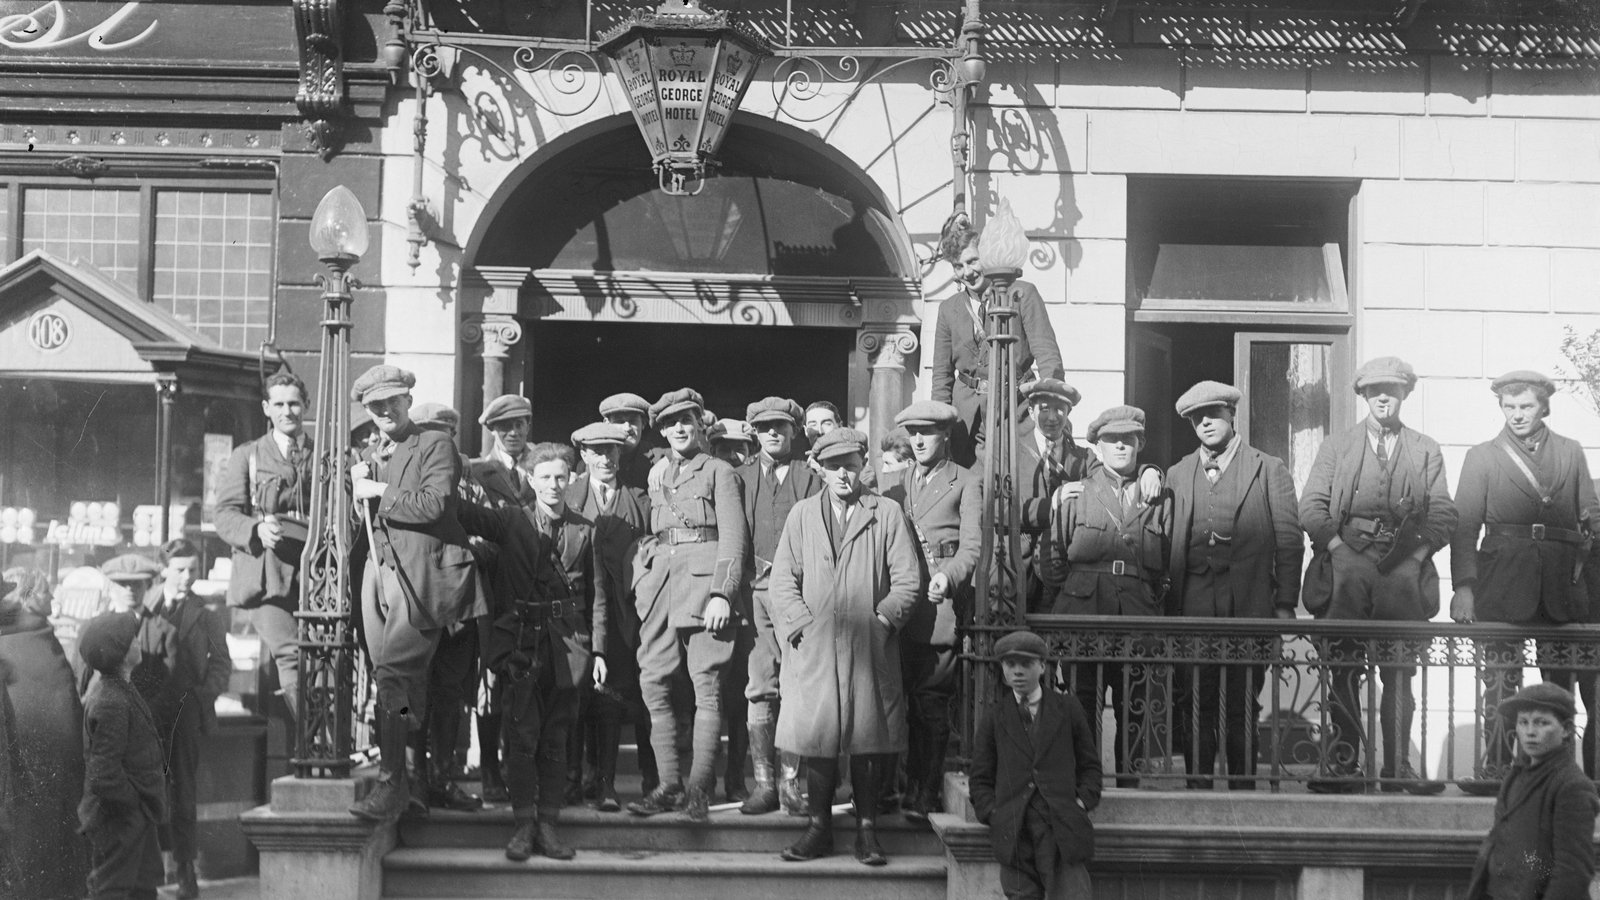 Image - Members of the anti-Treaty IRA at the entrance to the hotel in Limerick where they were quartered in March 1922. Image: Bettmann/Getty Images